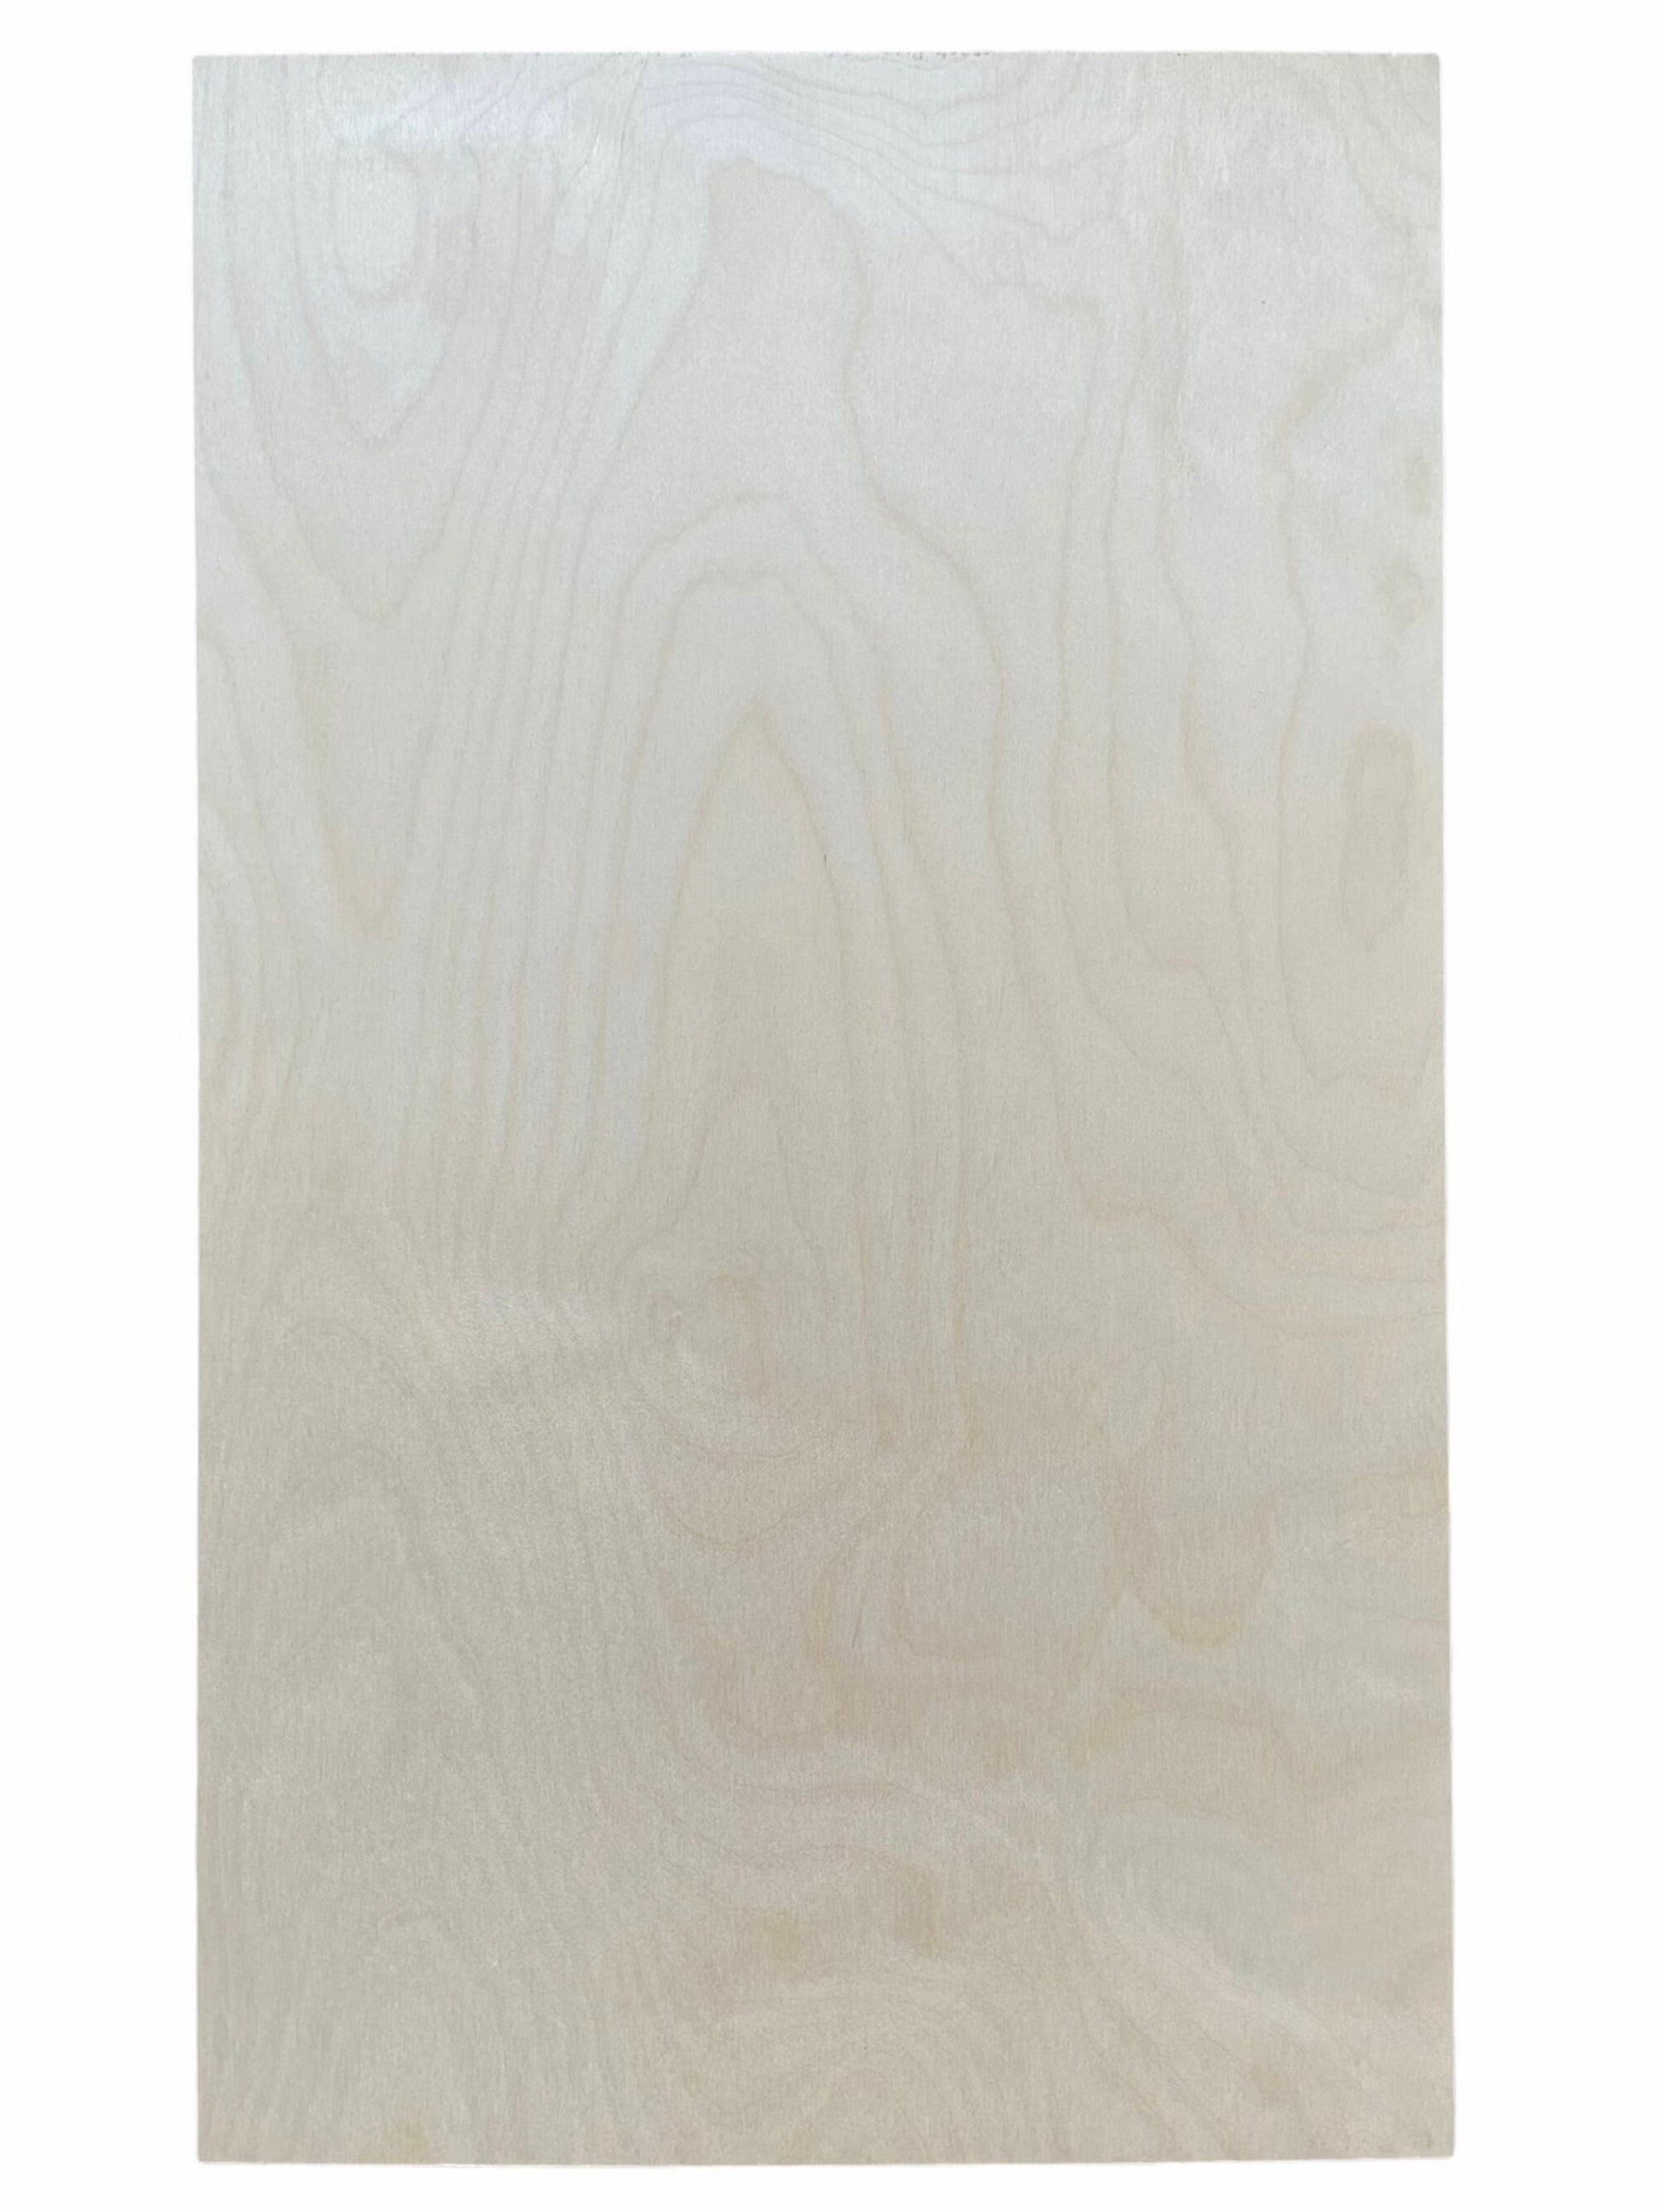 3mm (1/8) Premium Baltic Birch Plywood Sheets Ideal for Crafts